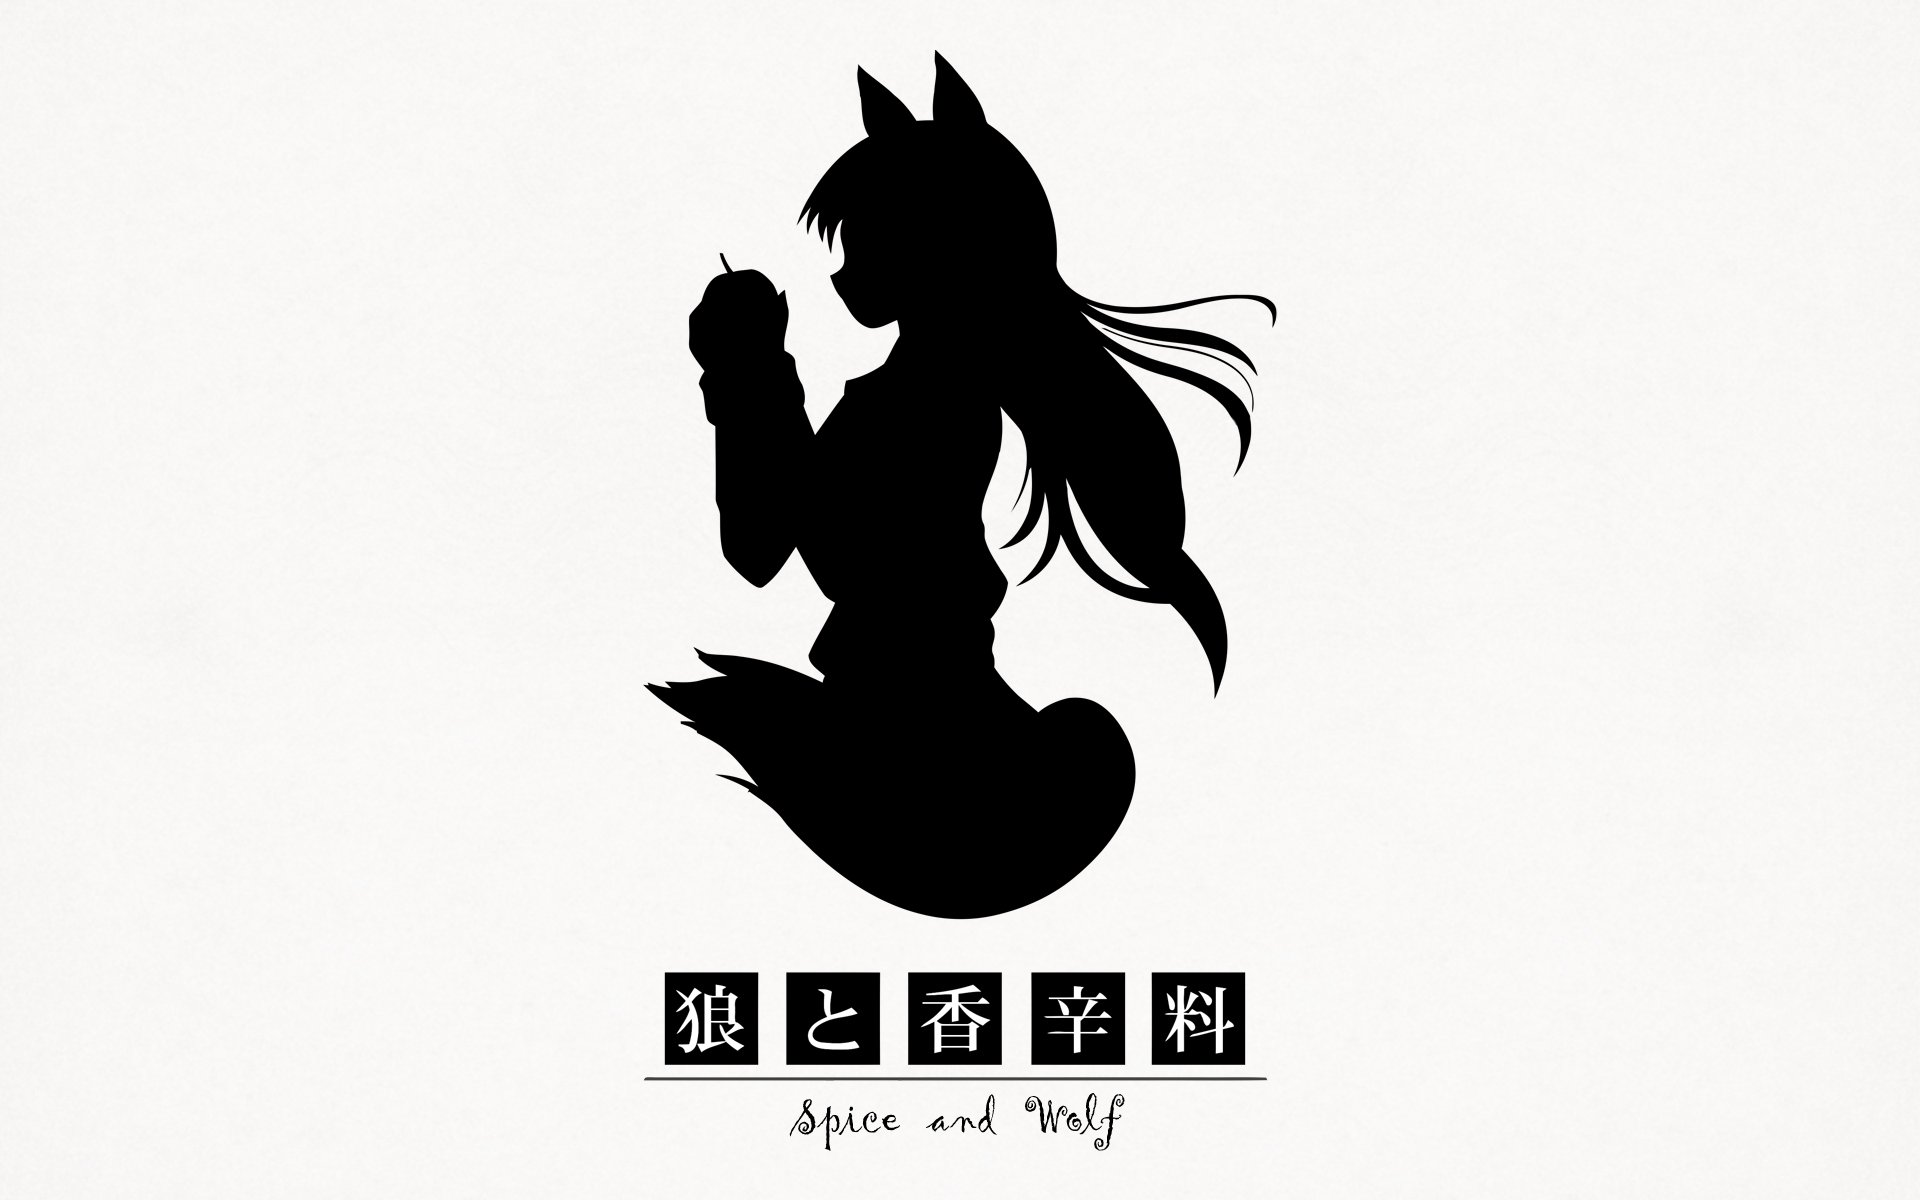 spice and wolf, holo (spice & wolf), anime